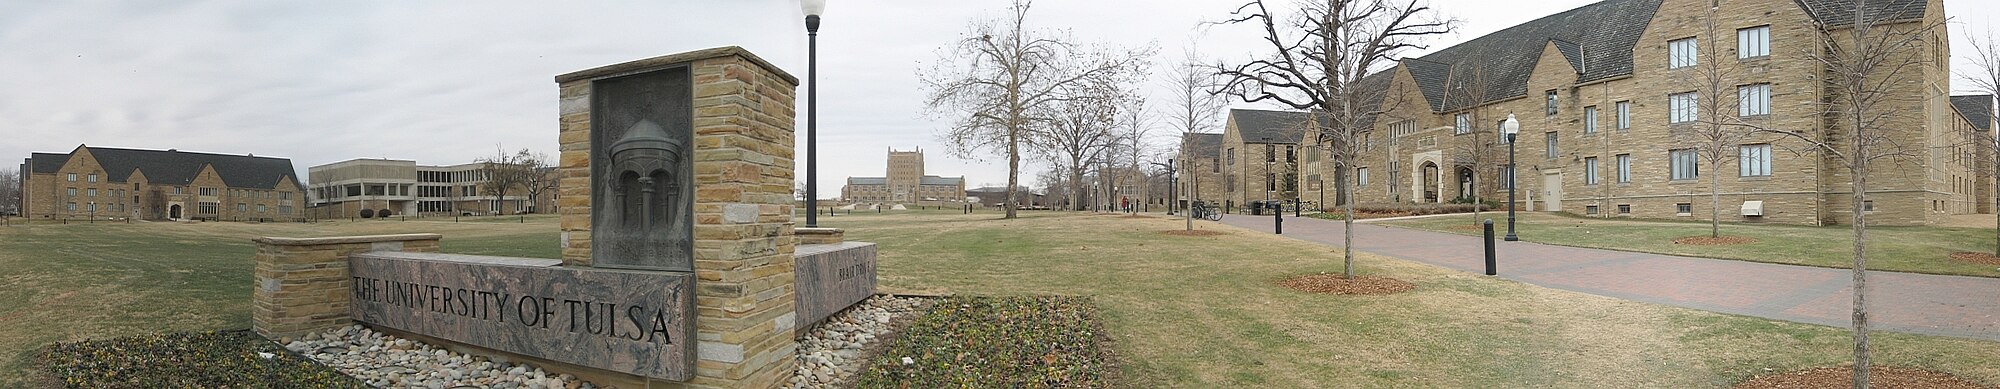 The University of Tulsa viewed from South Delaware Avenue